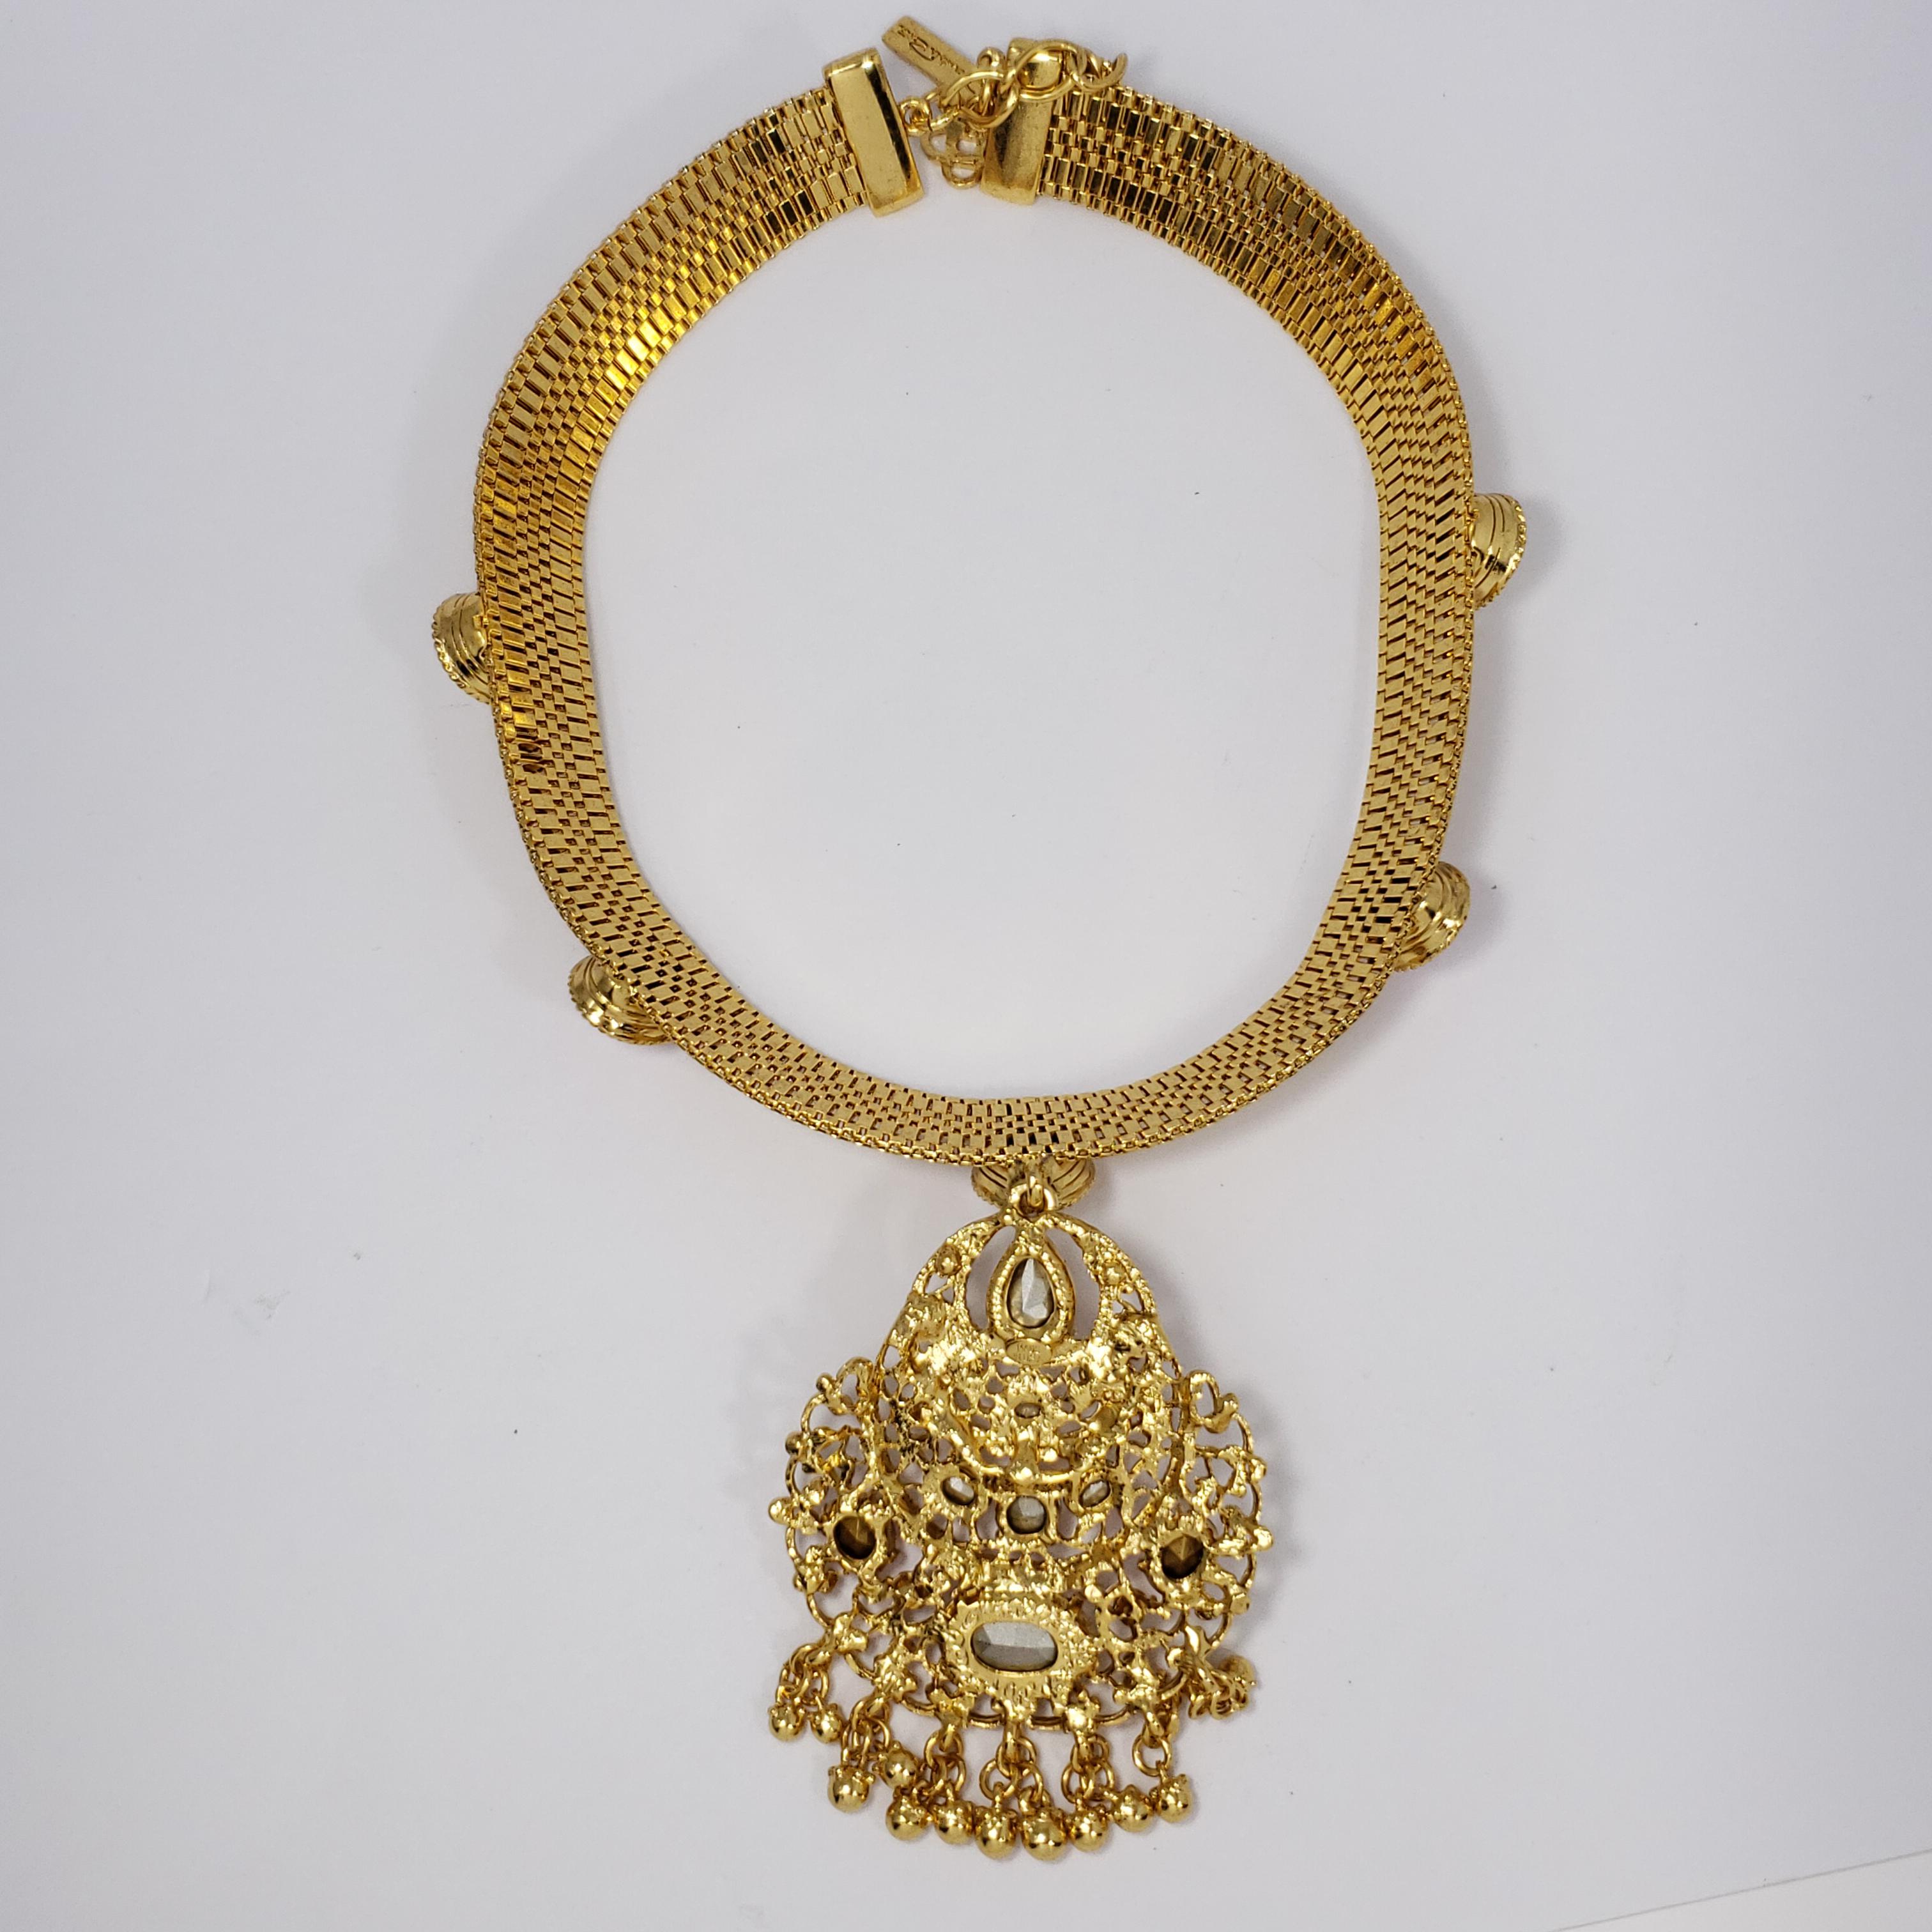 Oscar de la Renta Jeweled Collar Necklace in Gold, Rose and Topaz Crystals In New Condition For Sale In Milford, DE